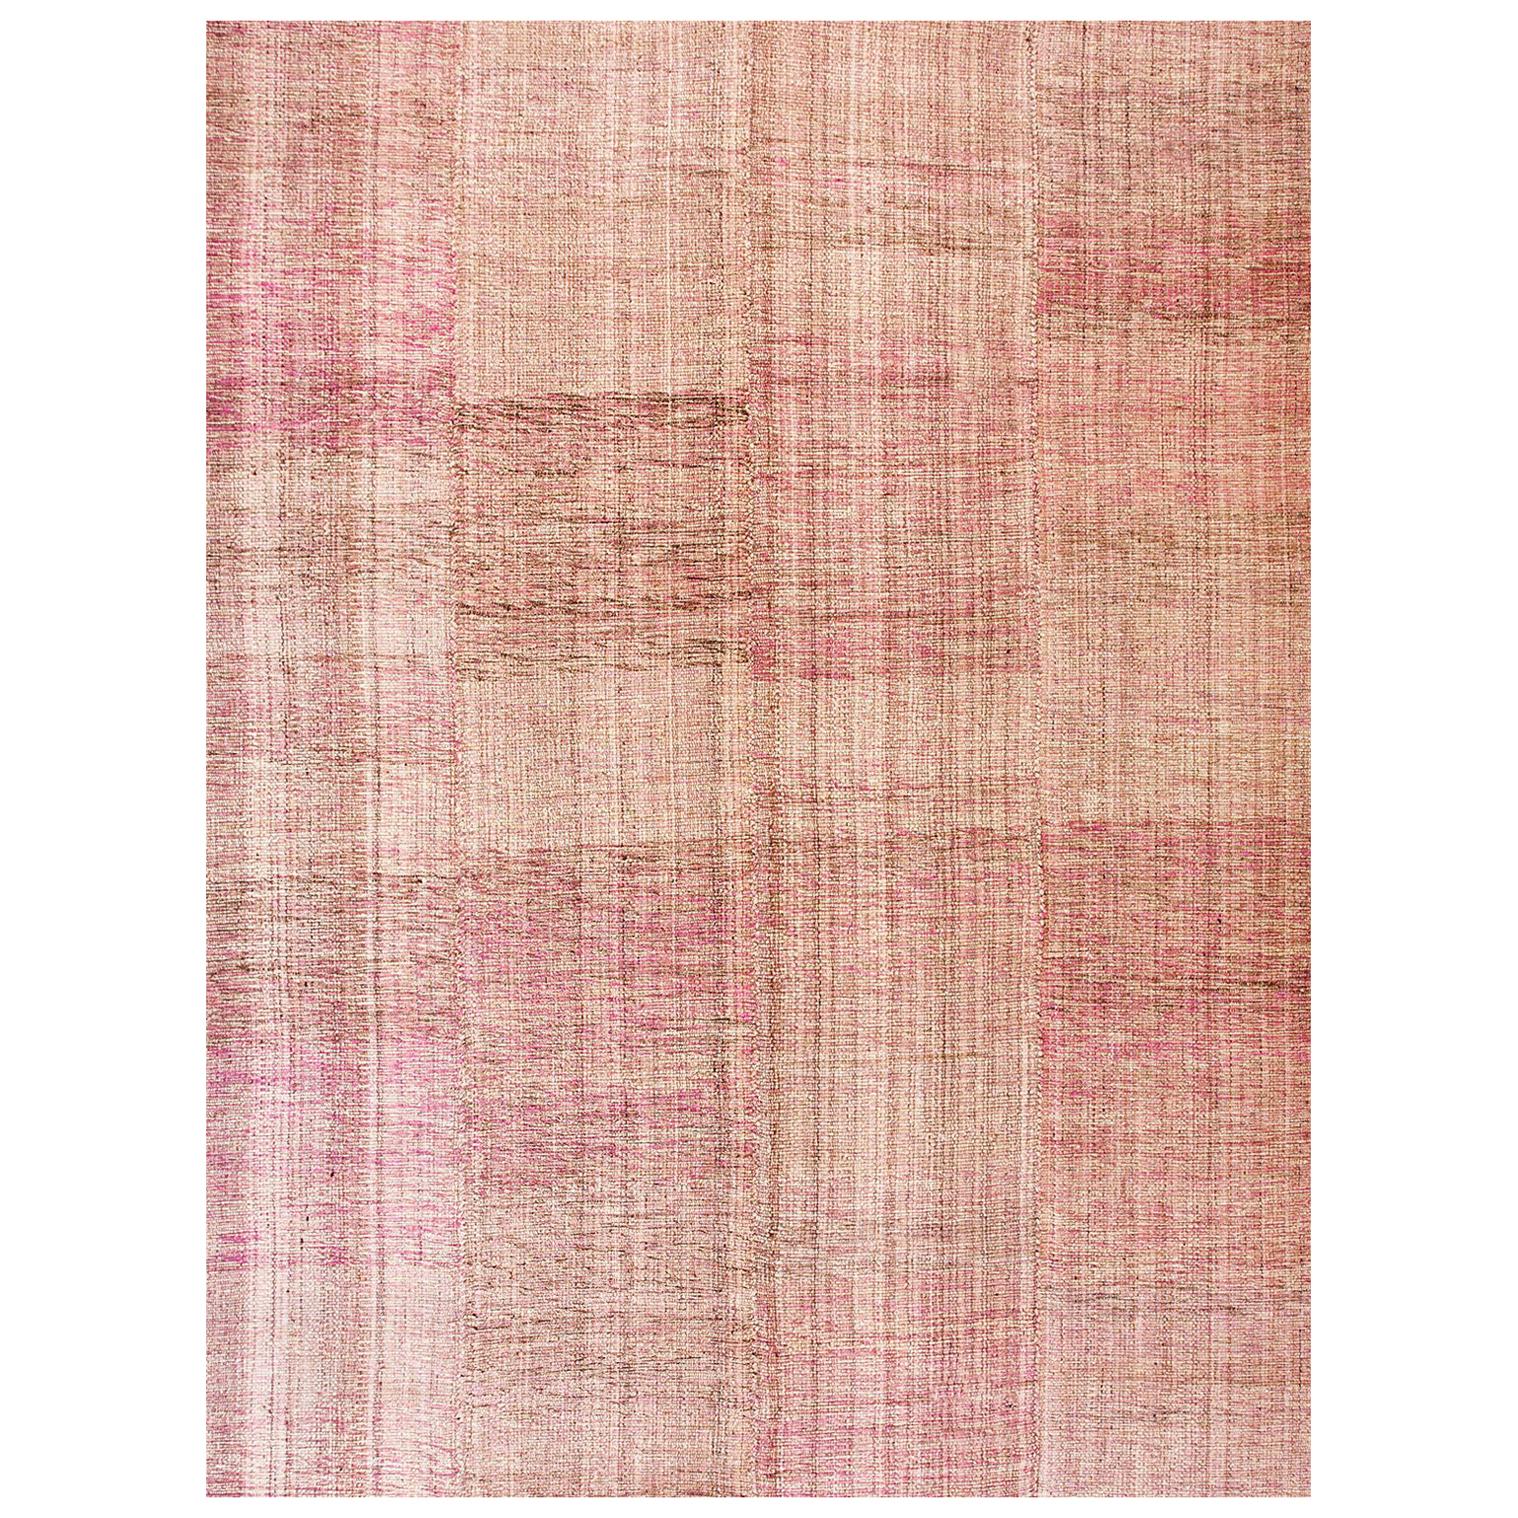 Contemporary Handwoven Wool Shaker Style Flat Weave Carpet ( 10'6" x 14'10" )